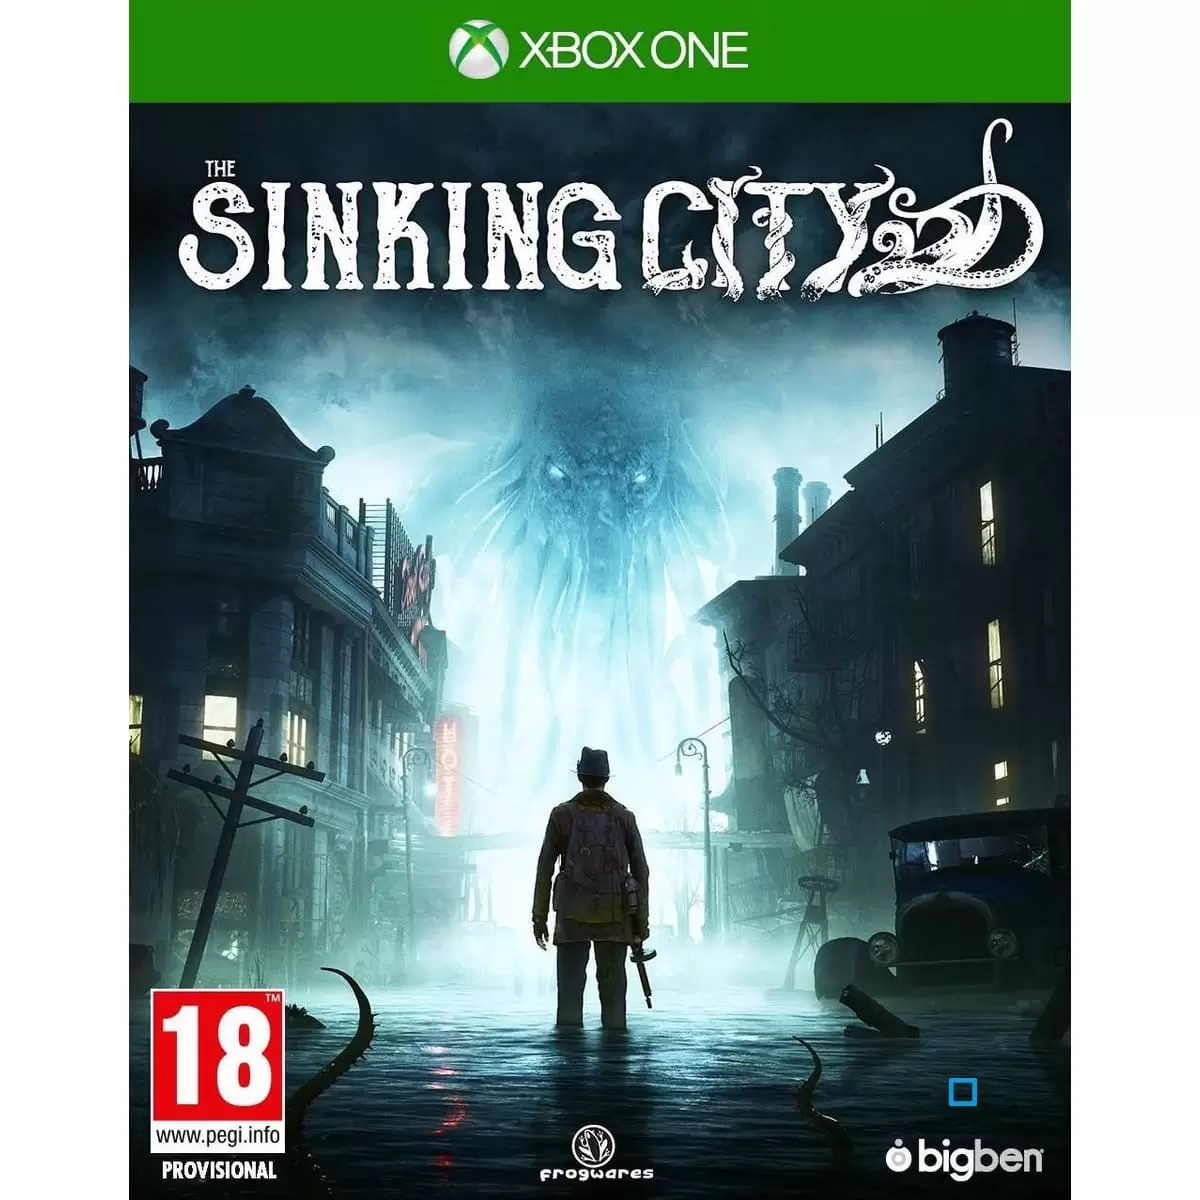 XBOX One Games - The Sinking City